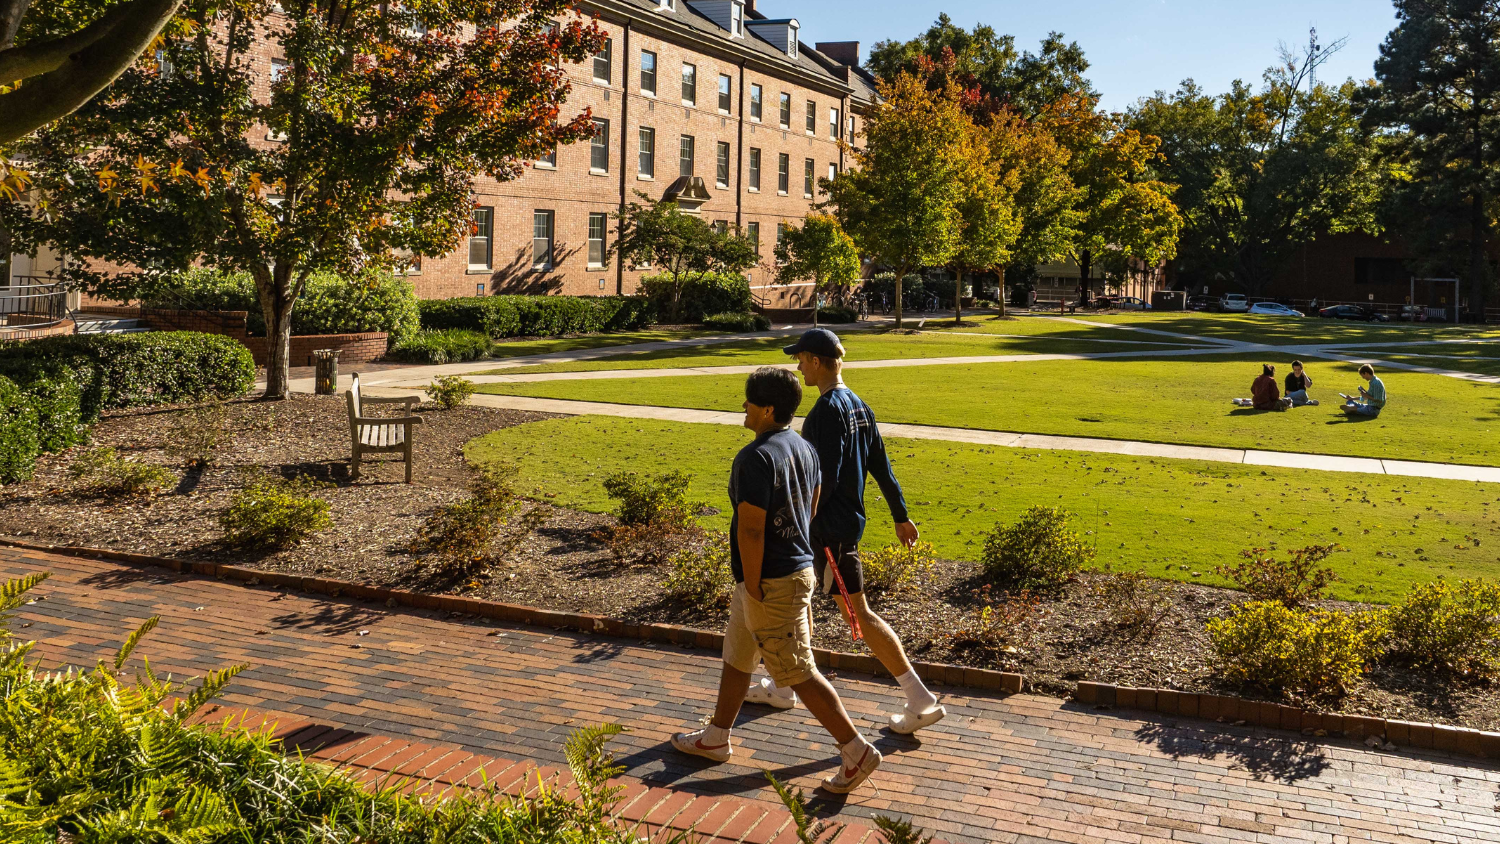 Students walk by Turrlington Residence Hall during a fall day. Photo by Marc Hal